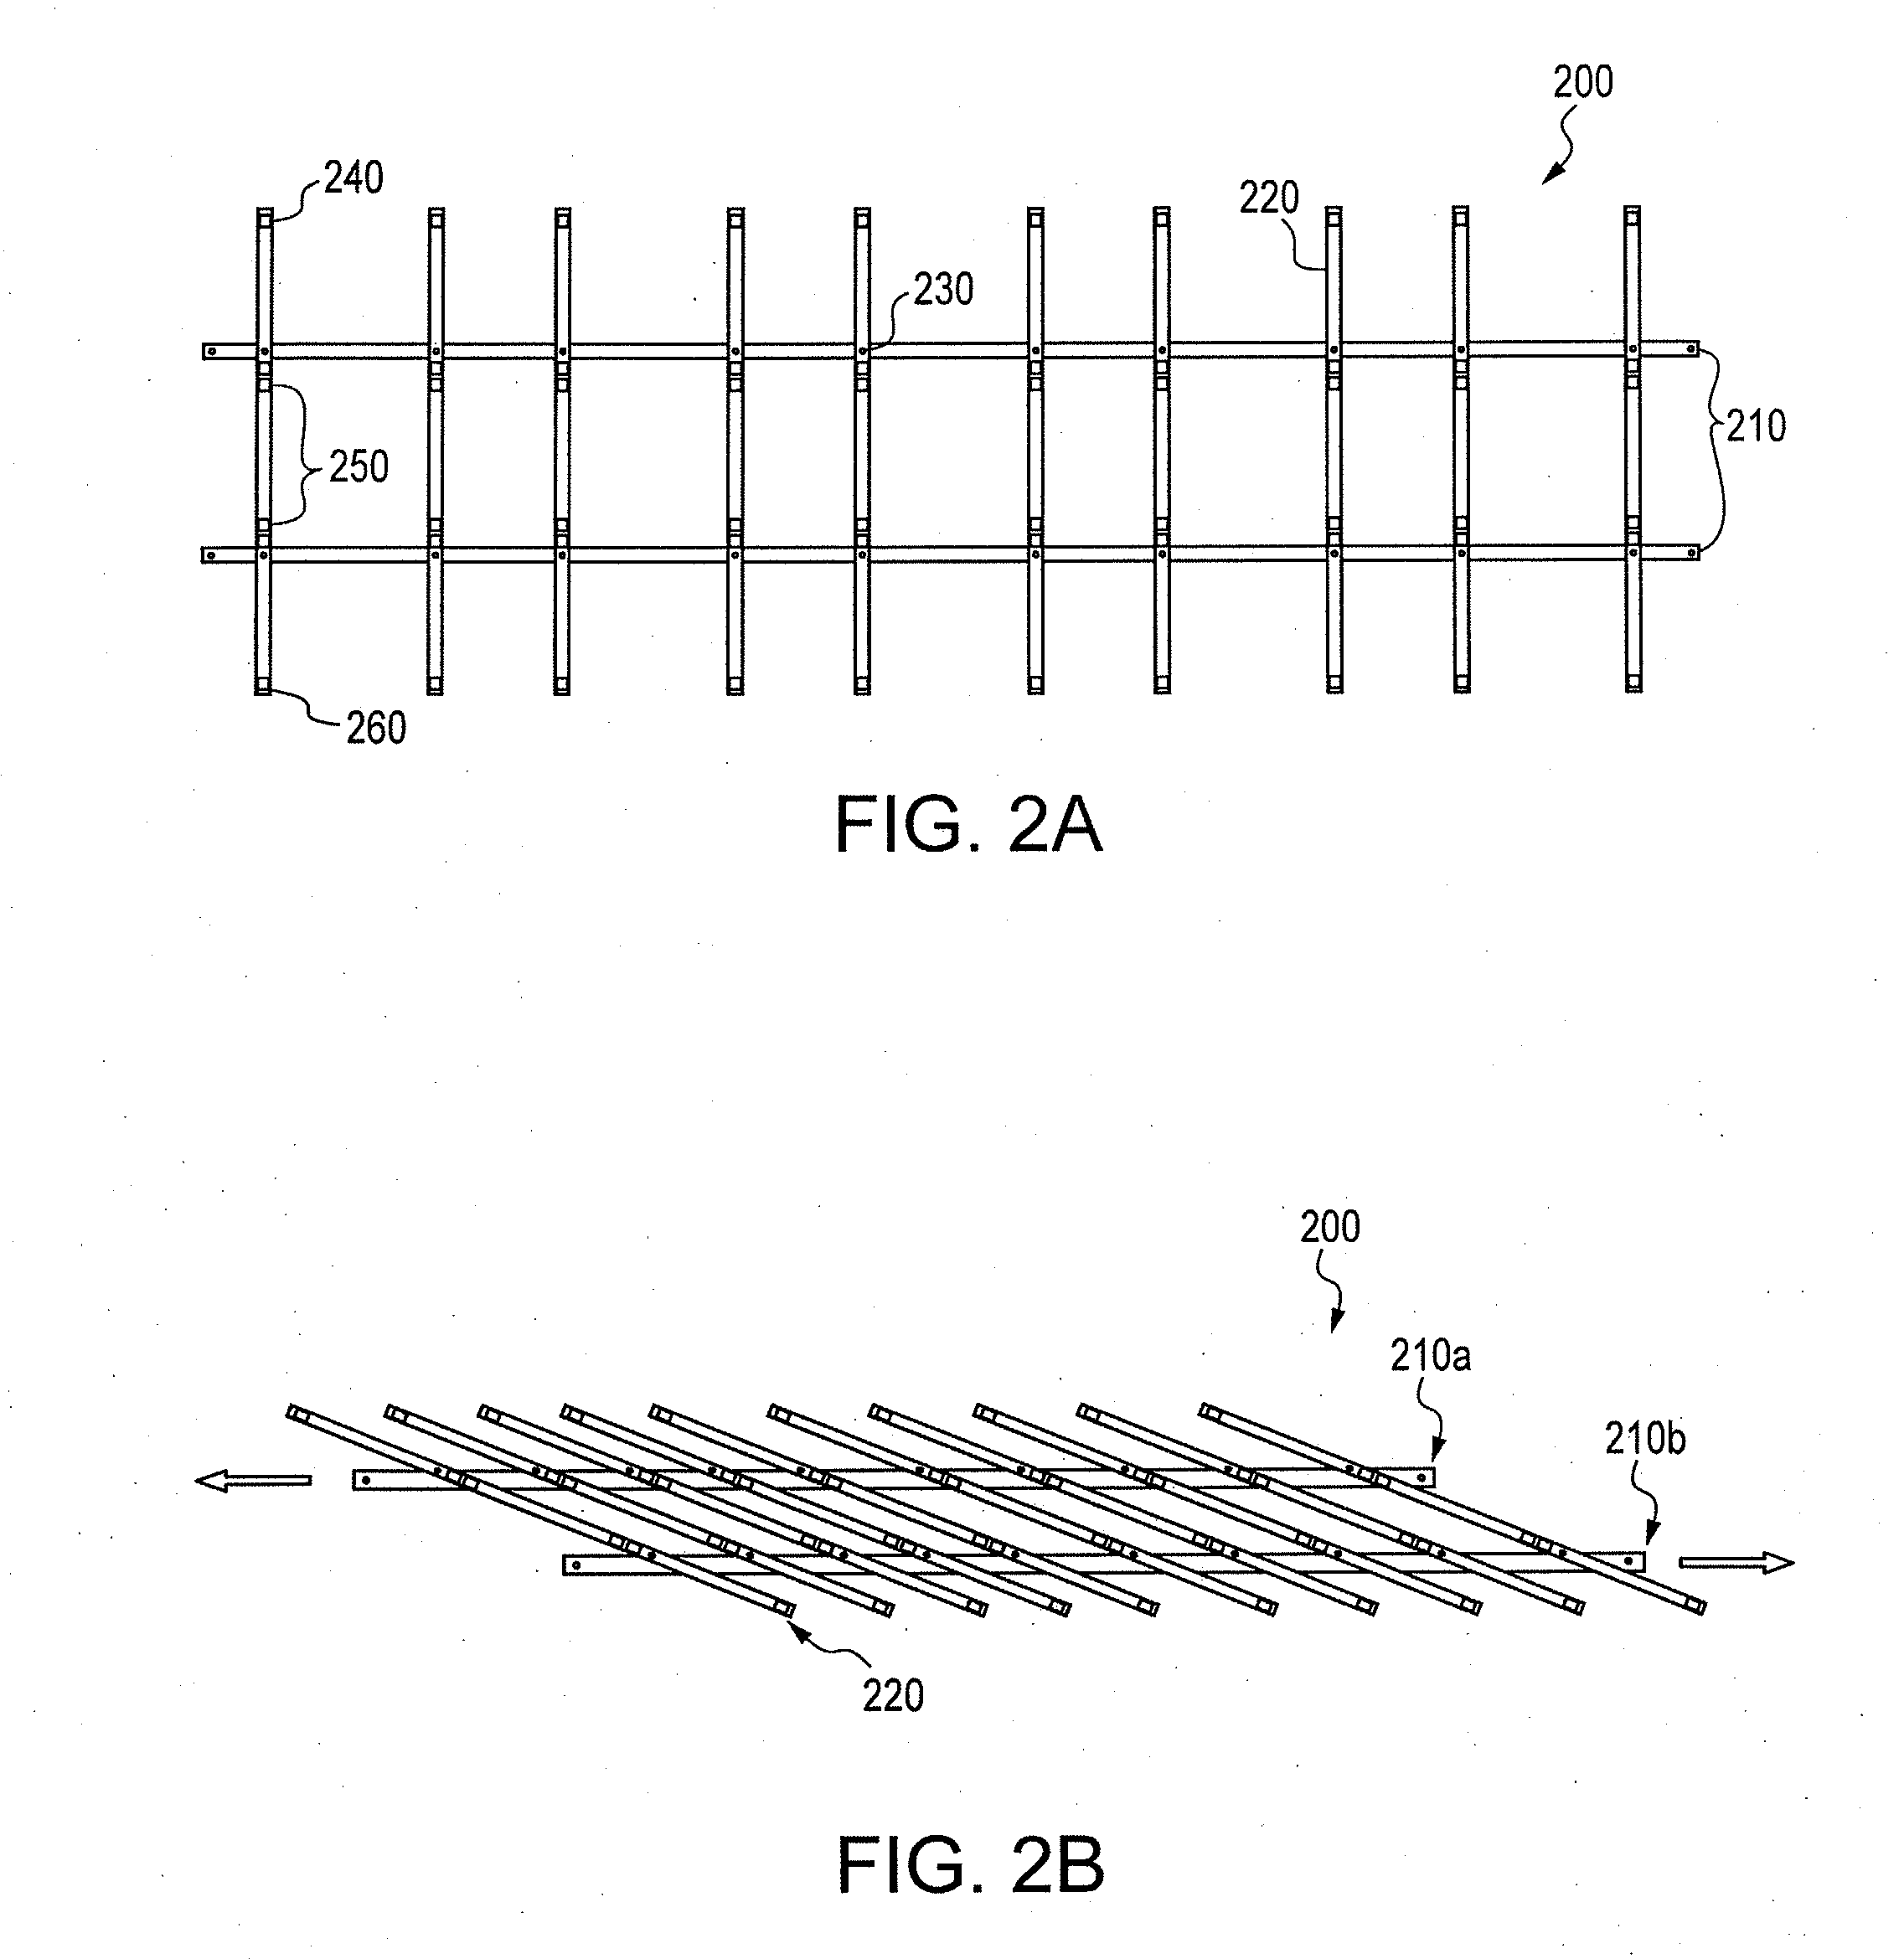 Method of installing a photovoltaic structure and methods of manufacturing a photovoltaic structure mounting system having a slider clip